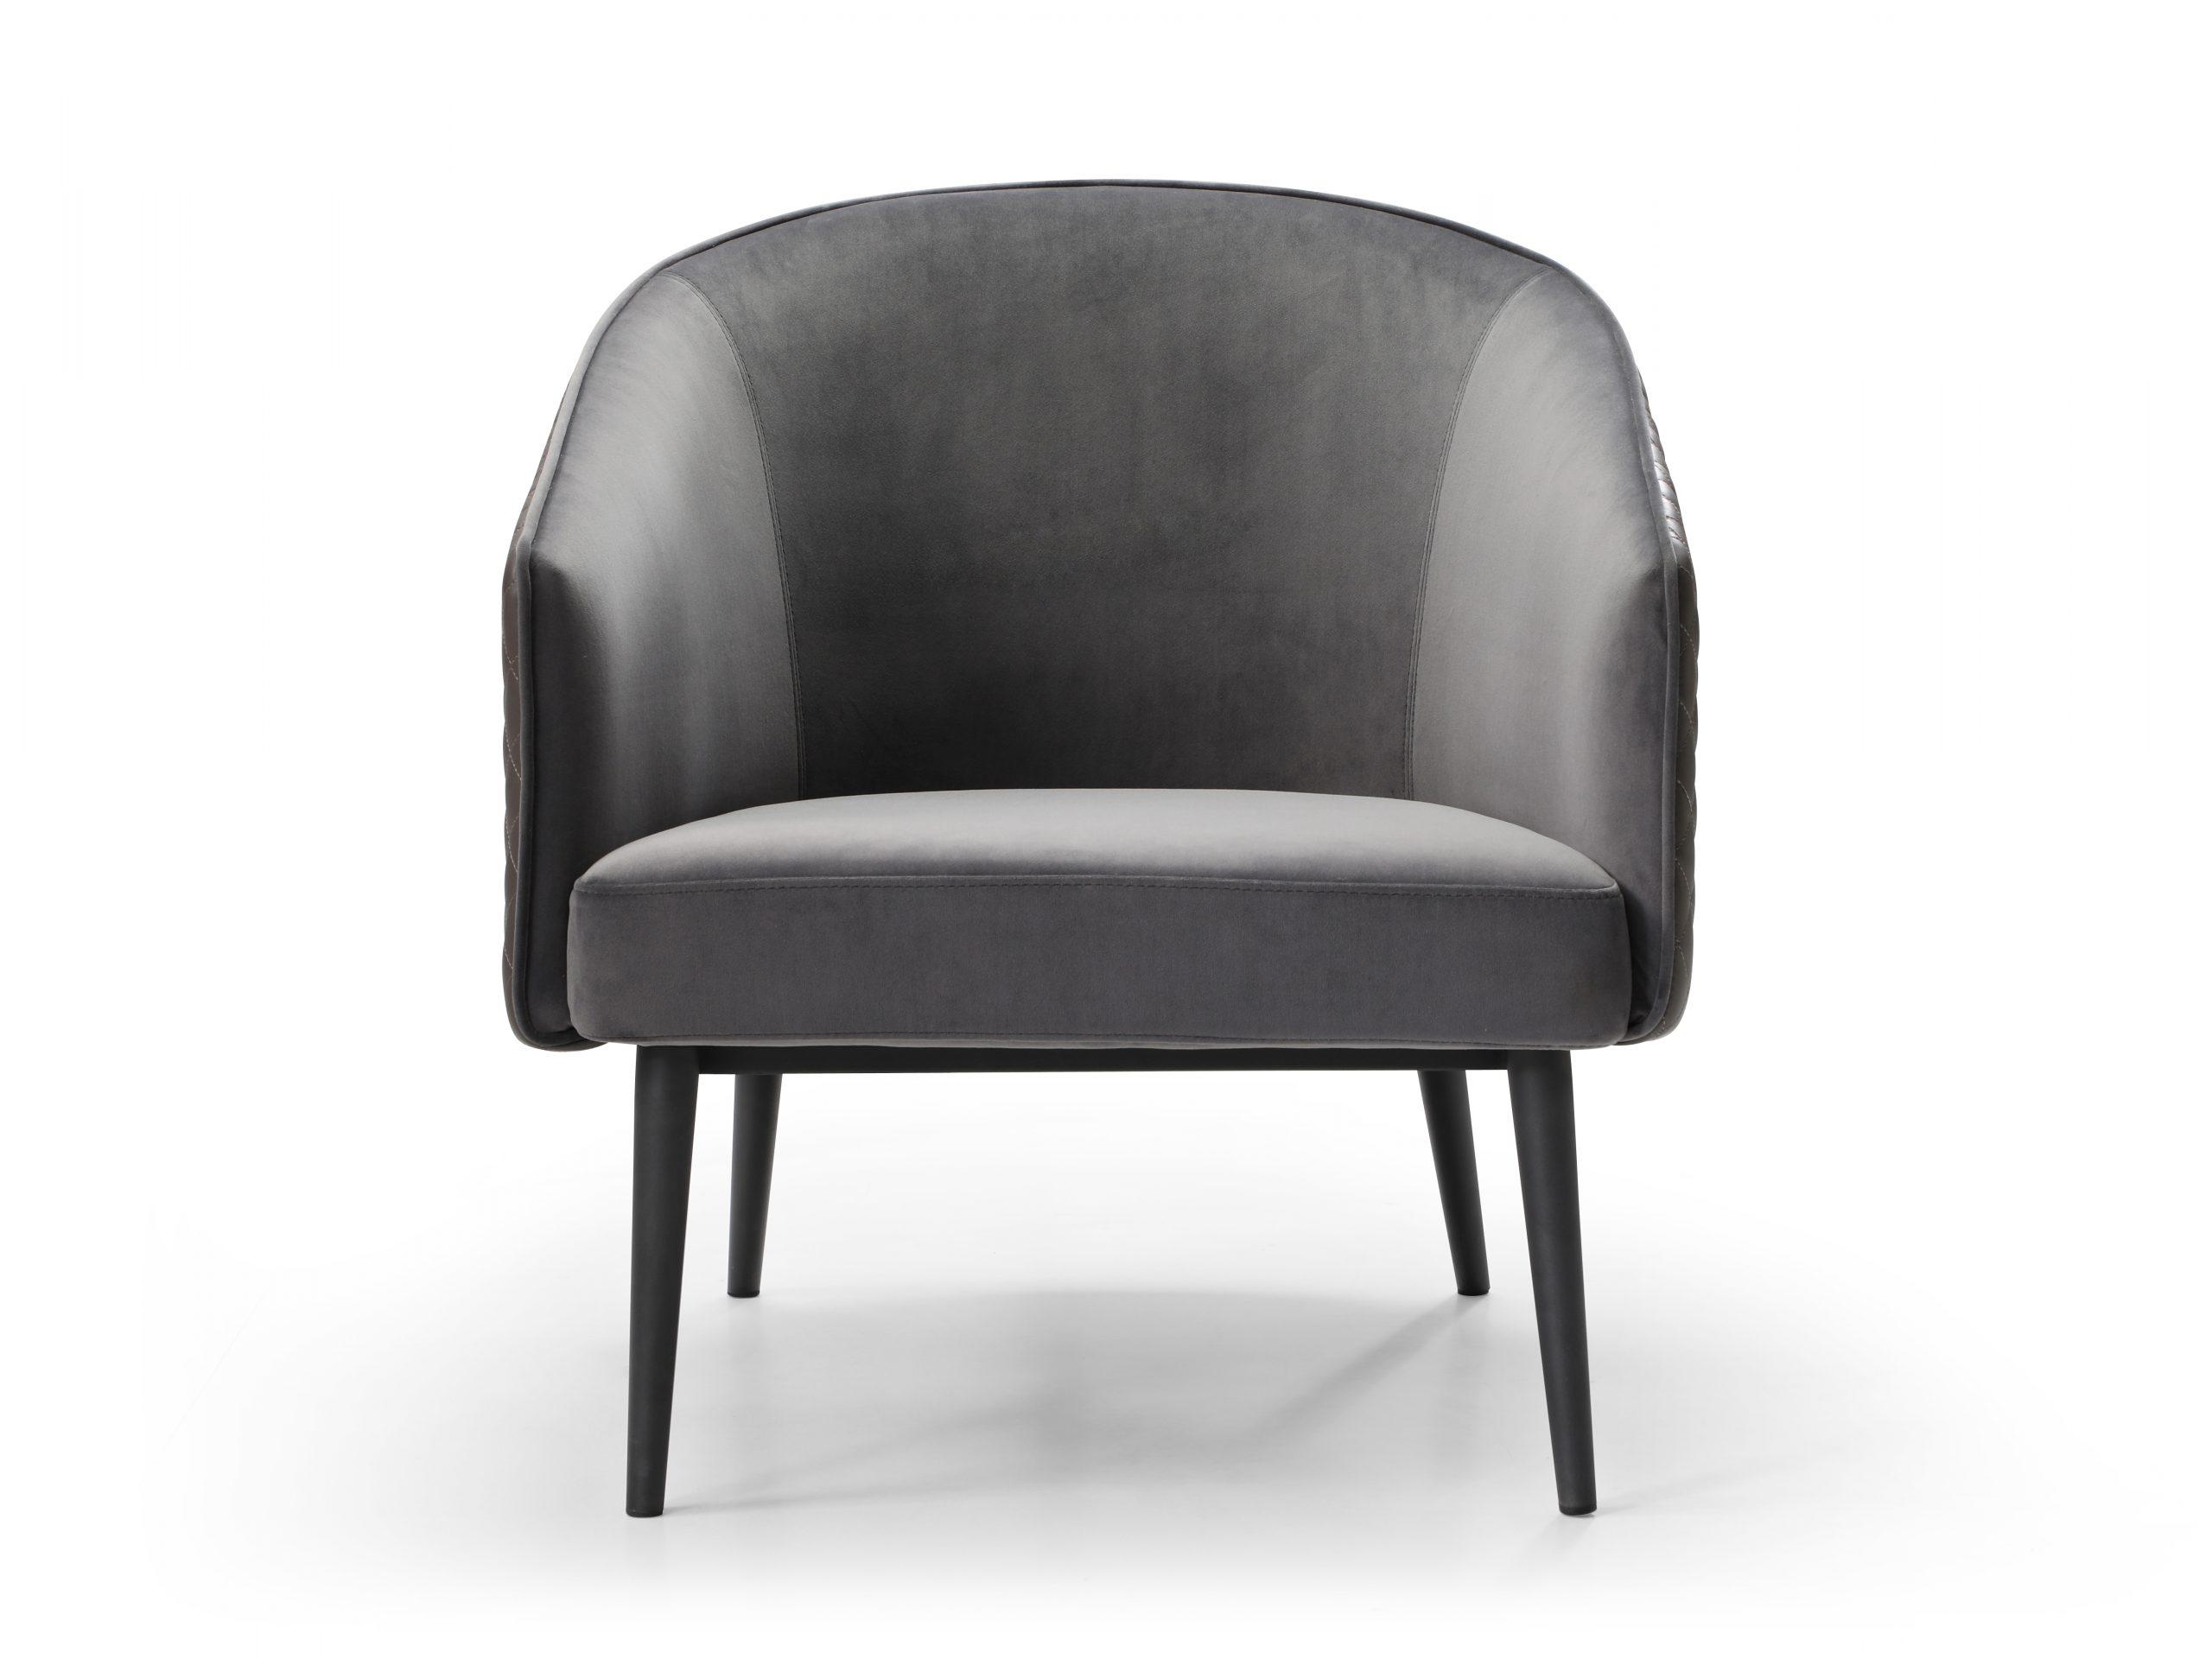 Modern Accent Chair CH1703FP-GRY/DGRY Boston CH1703FP-GRY/DGRY in Dark Gray Velvet